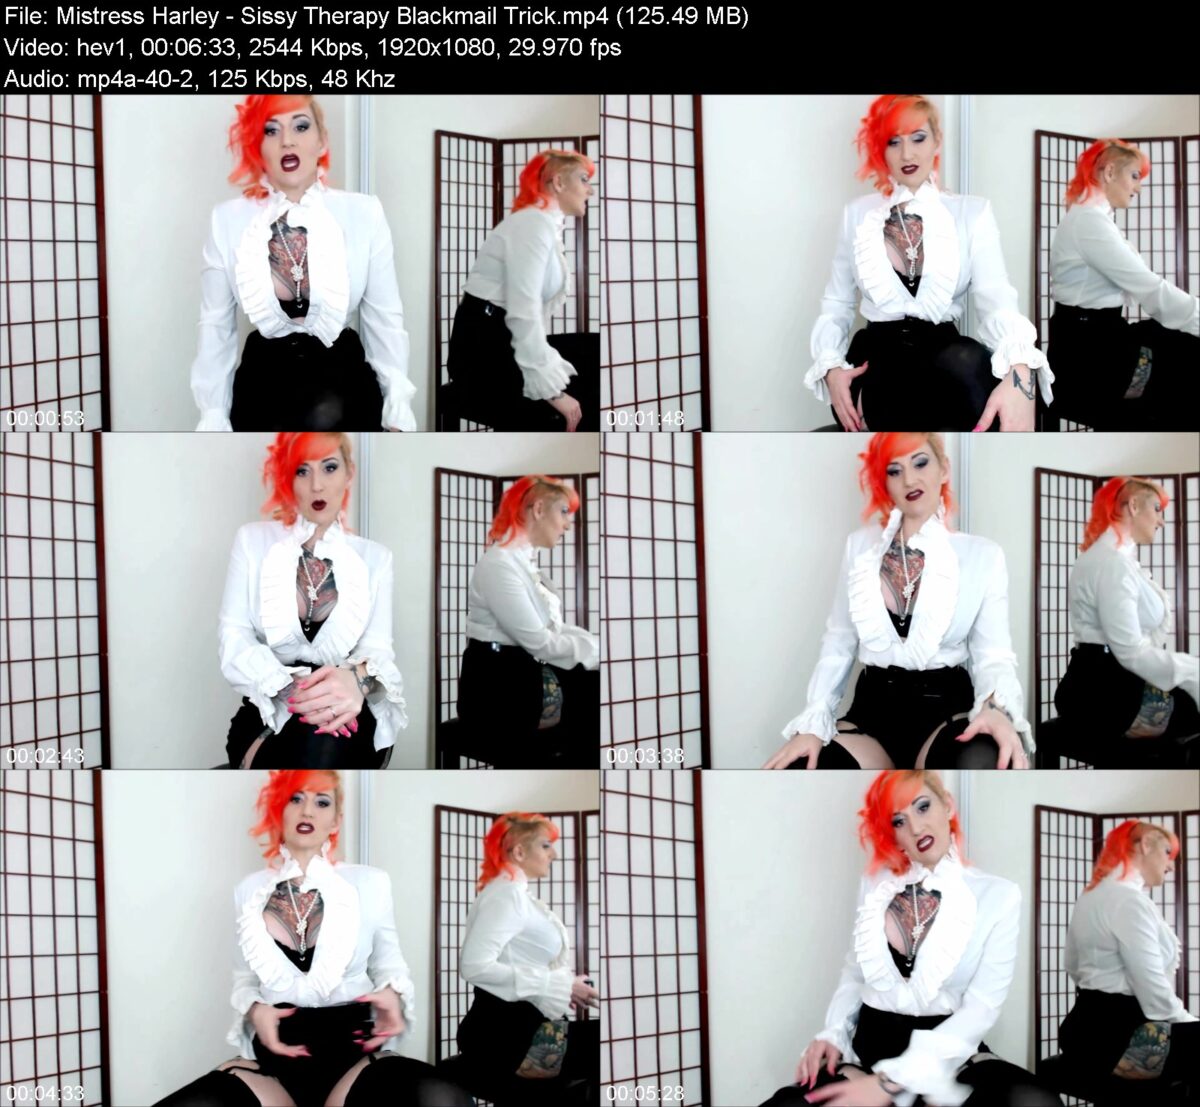 Mistress Harley - Sissy Therapy Blackmail Trick